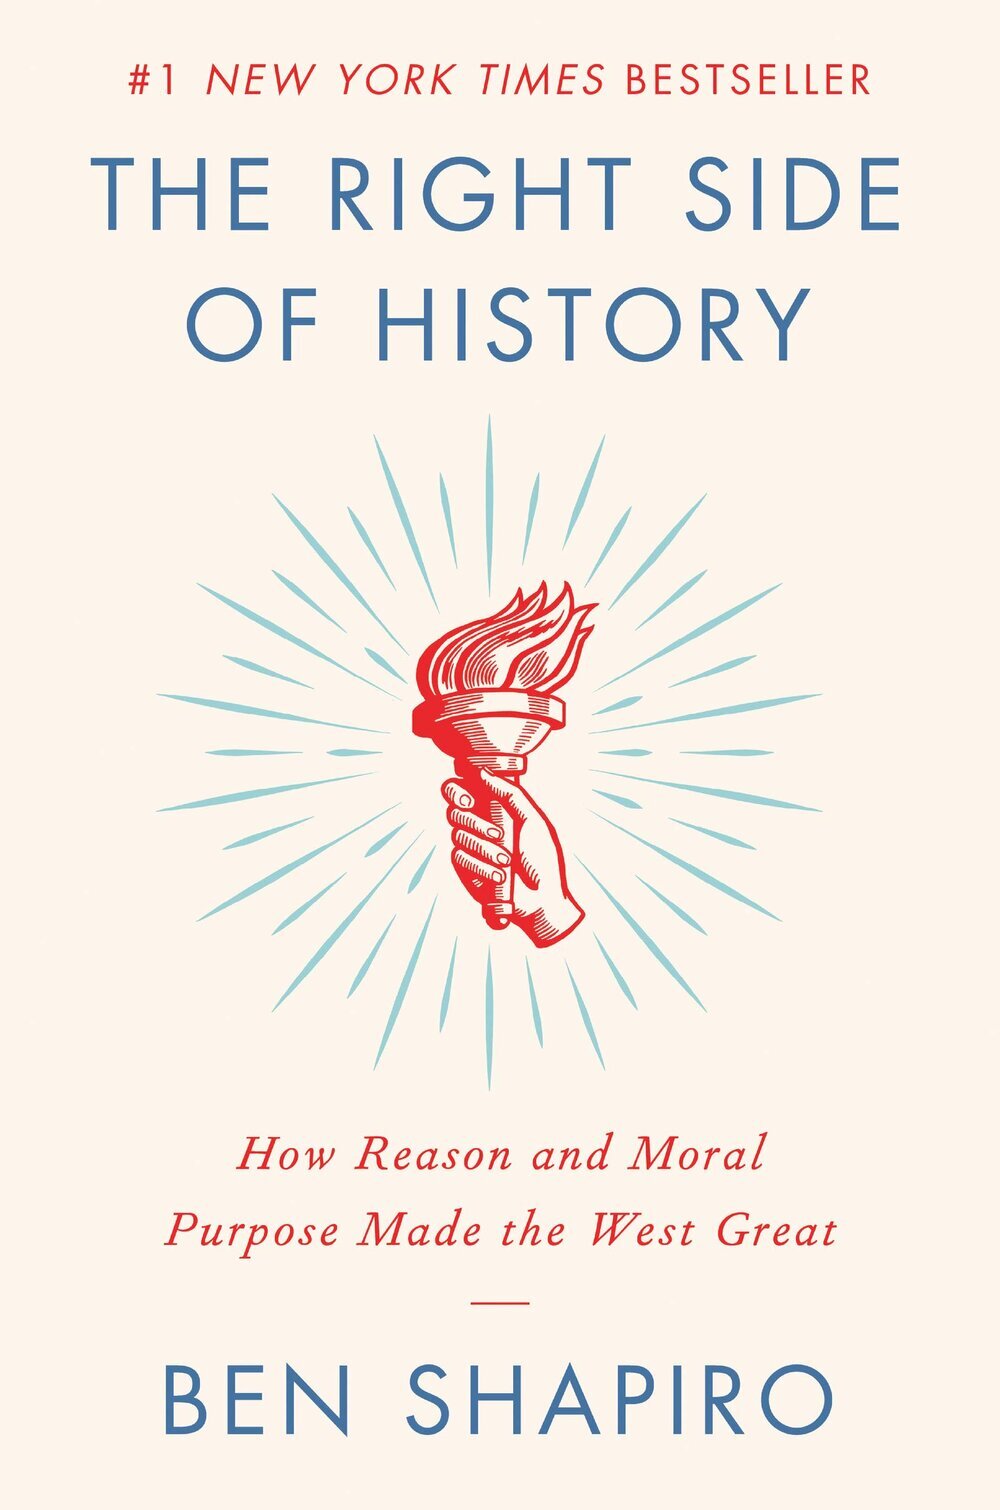 Worst Nonfiction 2020 The Right Side of History How Reason and Moral Purpose Made the West Great by Ben Shapiro.jpg